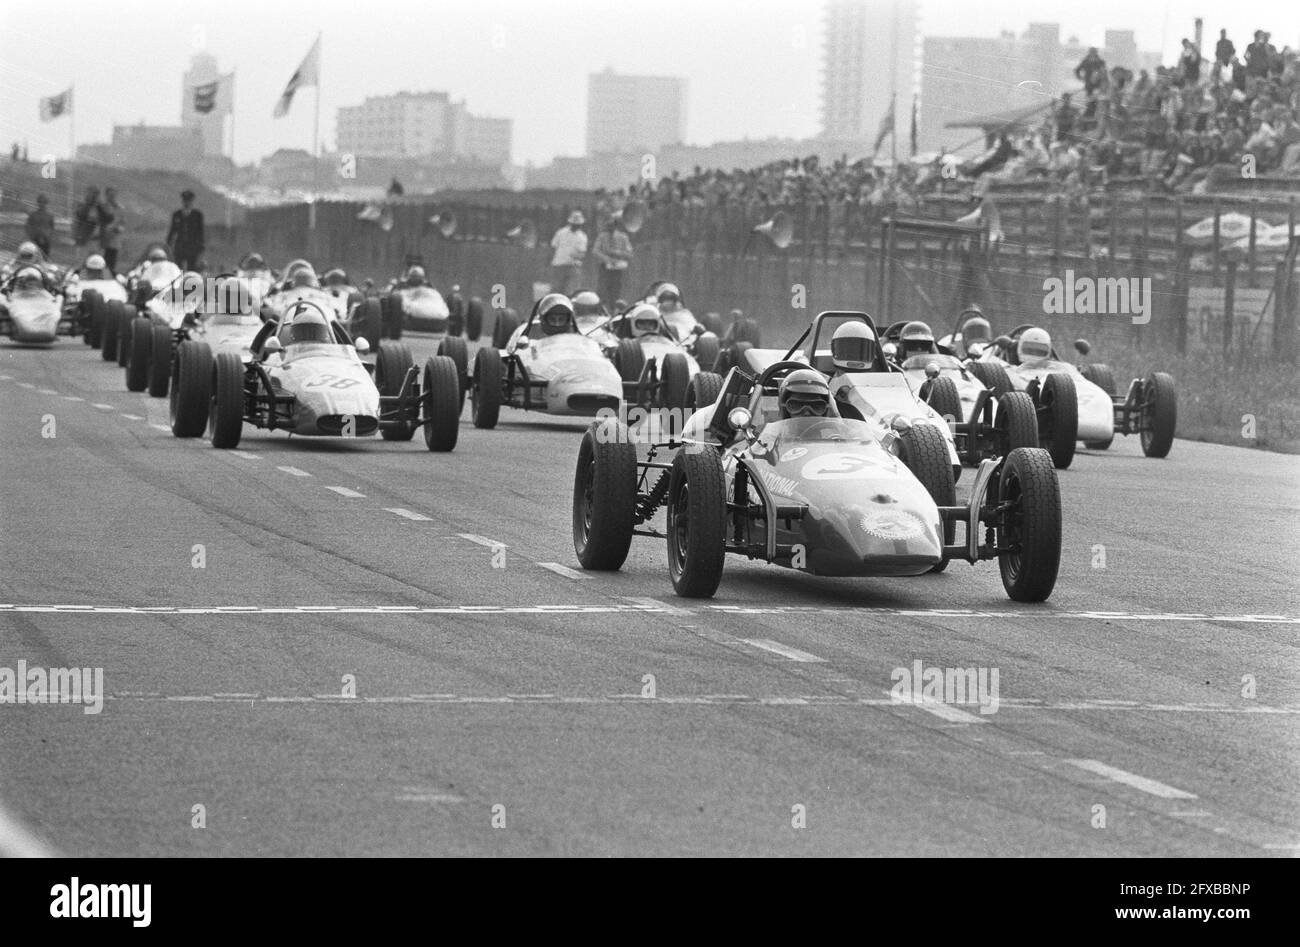 International Formula Vee car racing, Zandvoort, August 8, 1971, AUTORACES, The Netherlands, 20th century press agency photo, news to remember, documentary, historic photography 1945-1990, visual stories, human history of the Twentieth Century, capturing moments in time Stock Photo